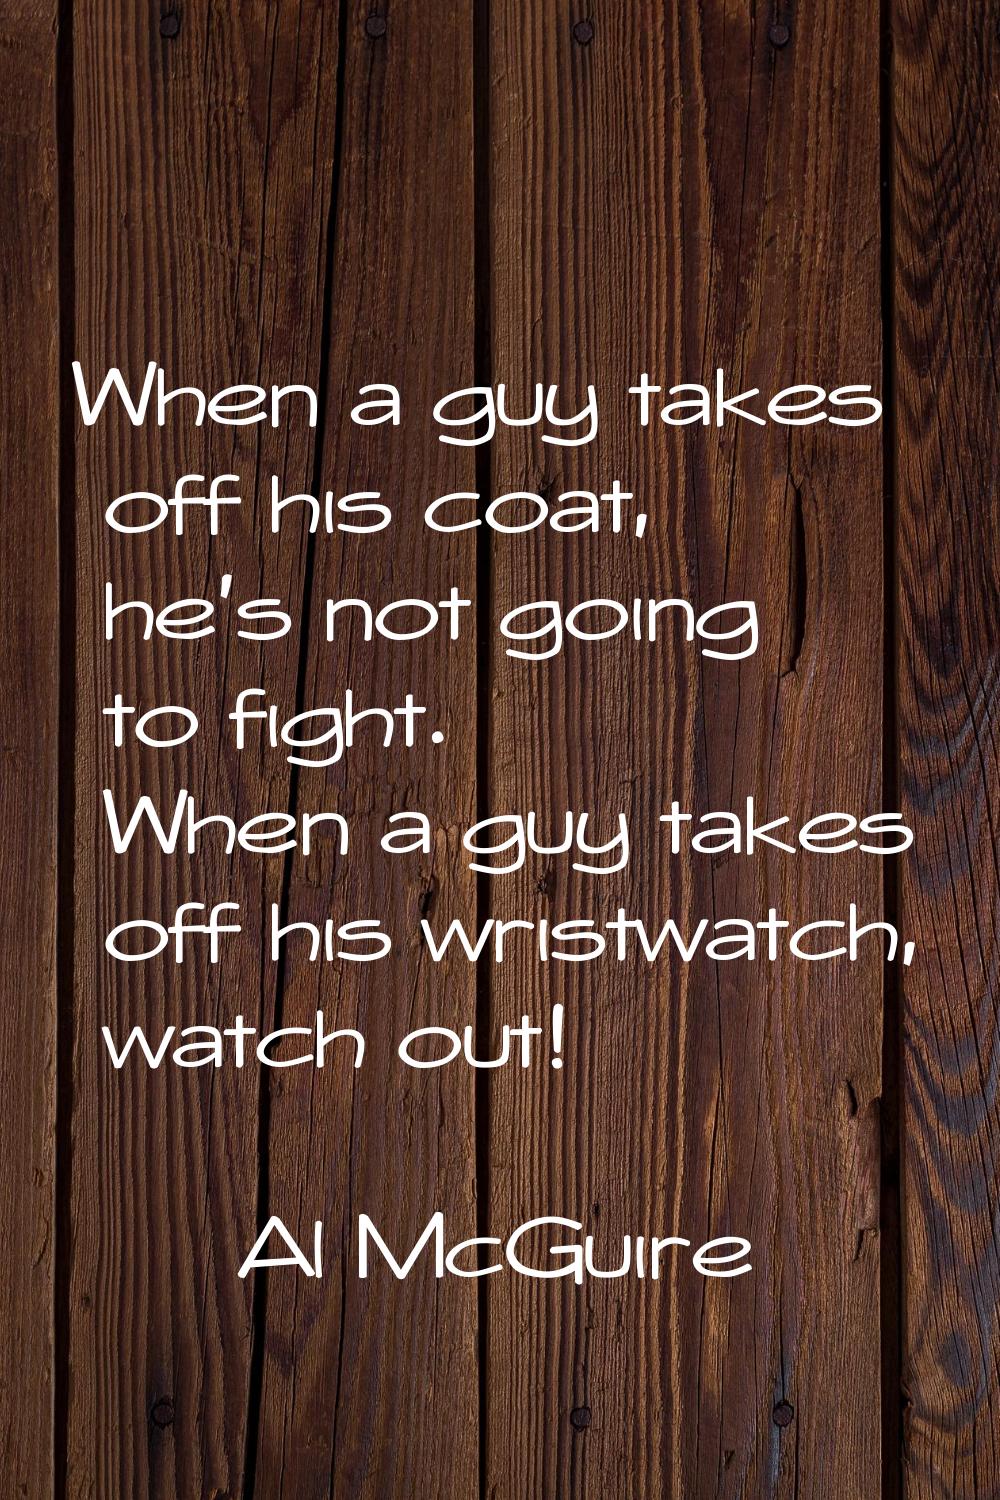 When a guy takes off his coat, he's not going to fight. When a guy takes off his wristwatch, watch 